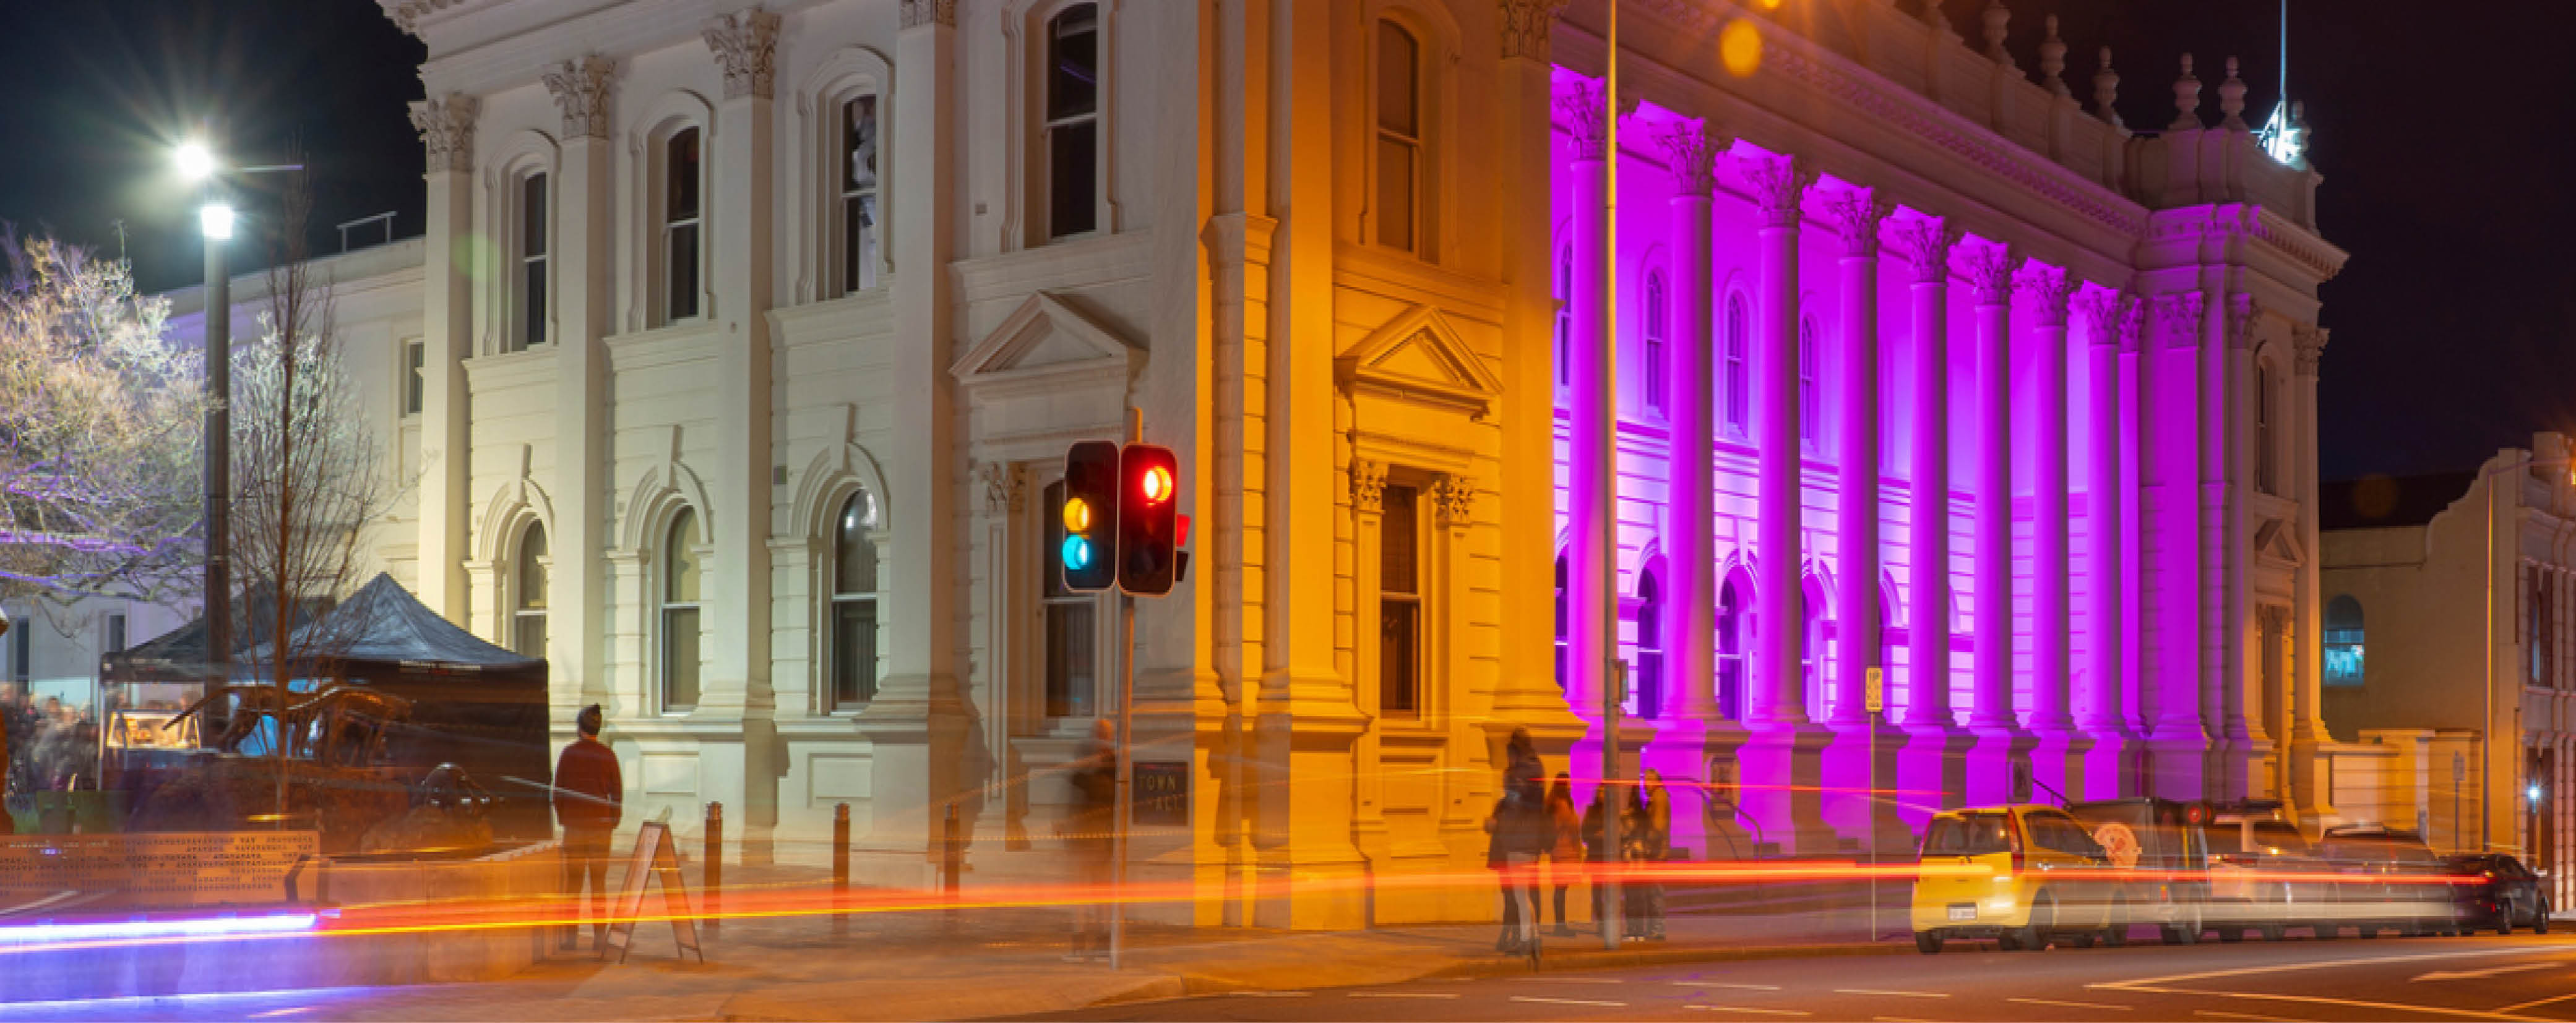 Illuminating town hall at night time with colored lighting